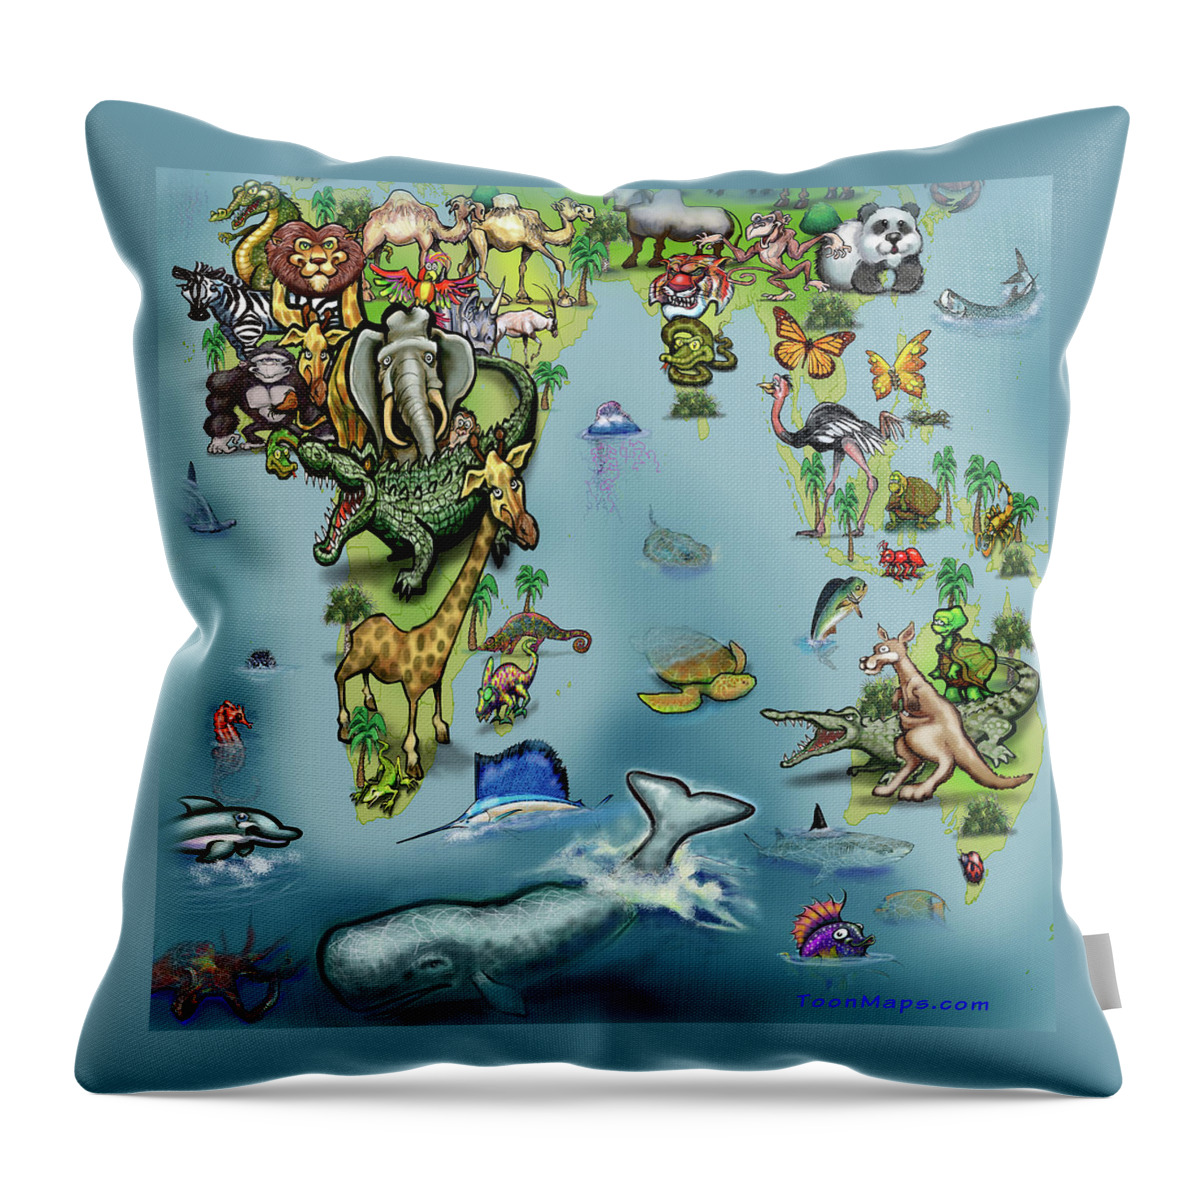 Africa Throw Pillow featuring the digital art Africa Oceania Animals Map by Kevin Middleton